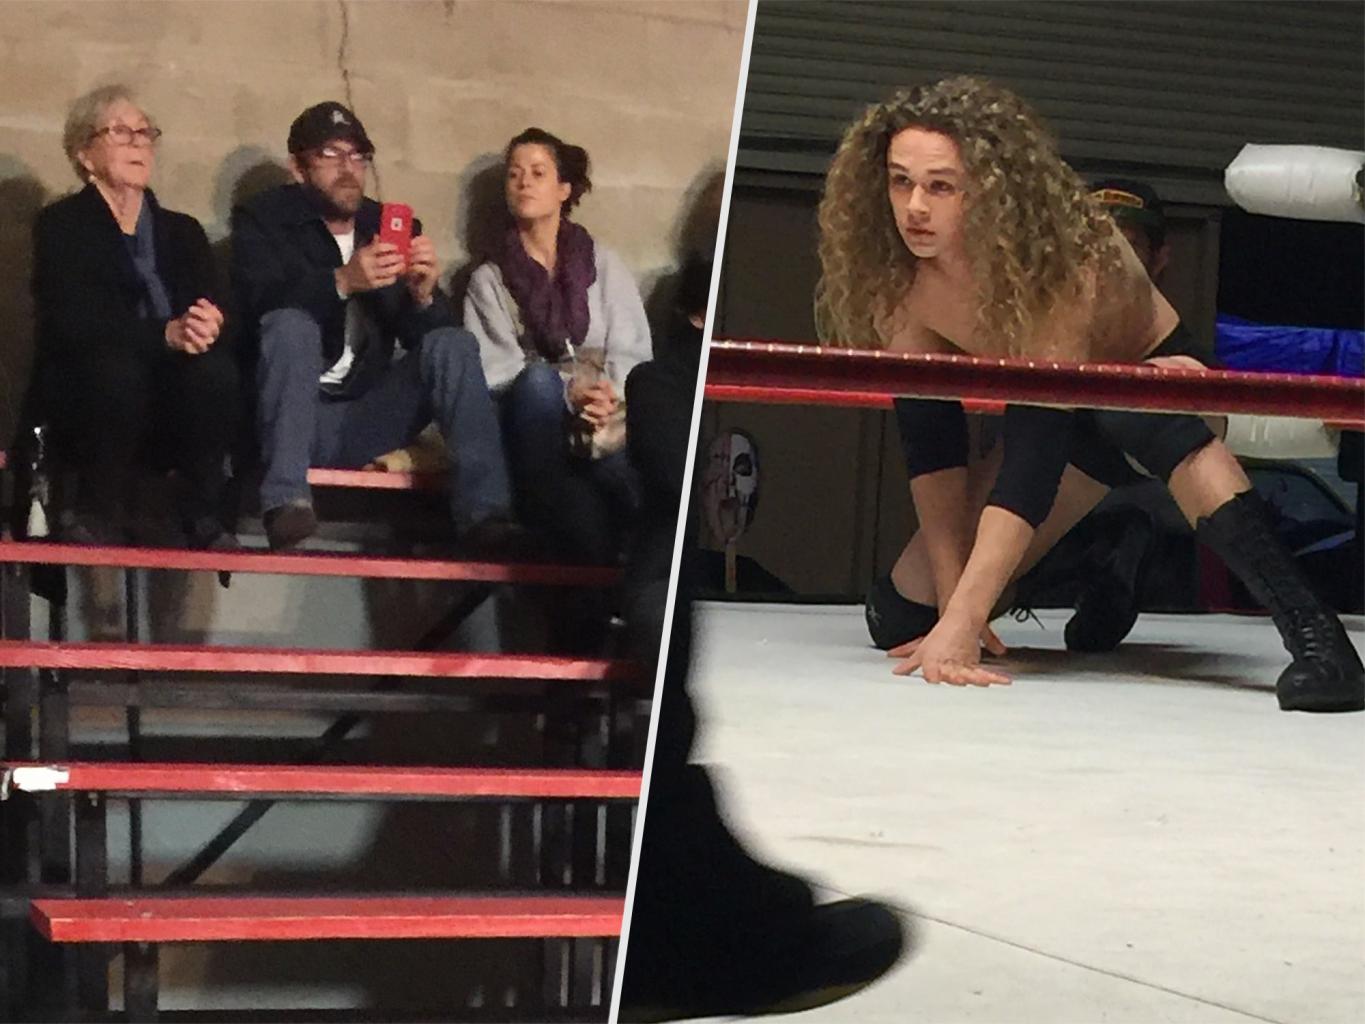 Luke Perry Attends Local Wrestling Event to Support His Son